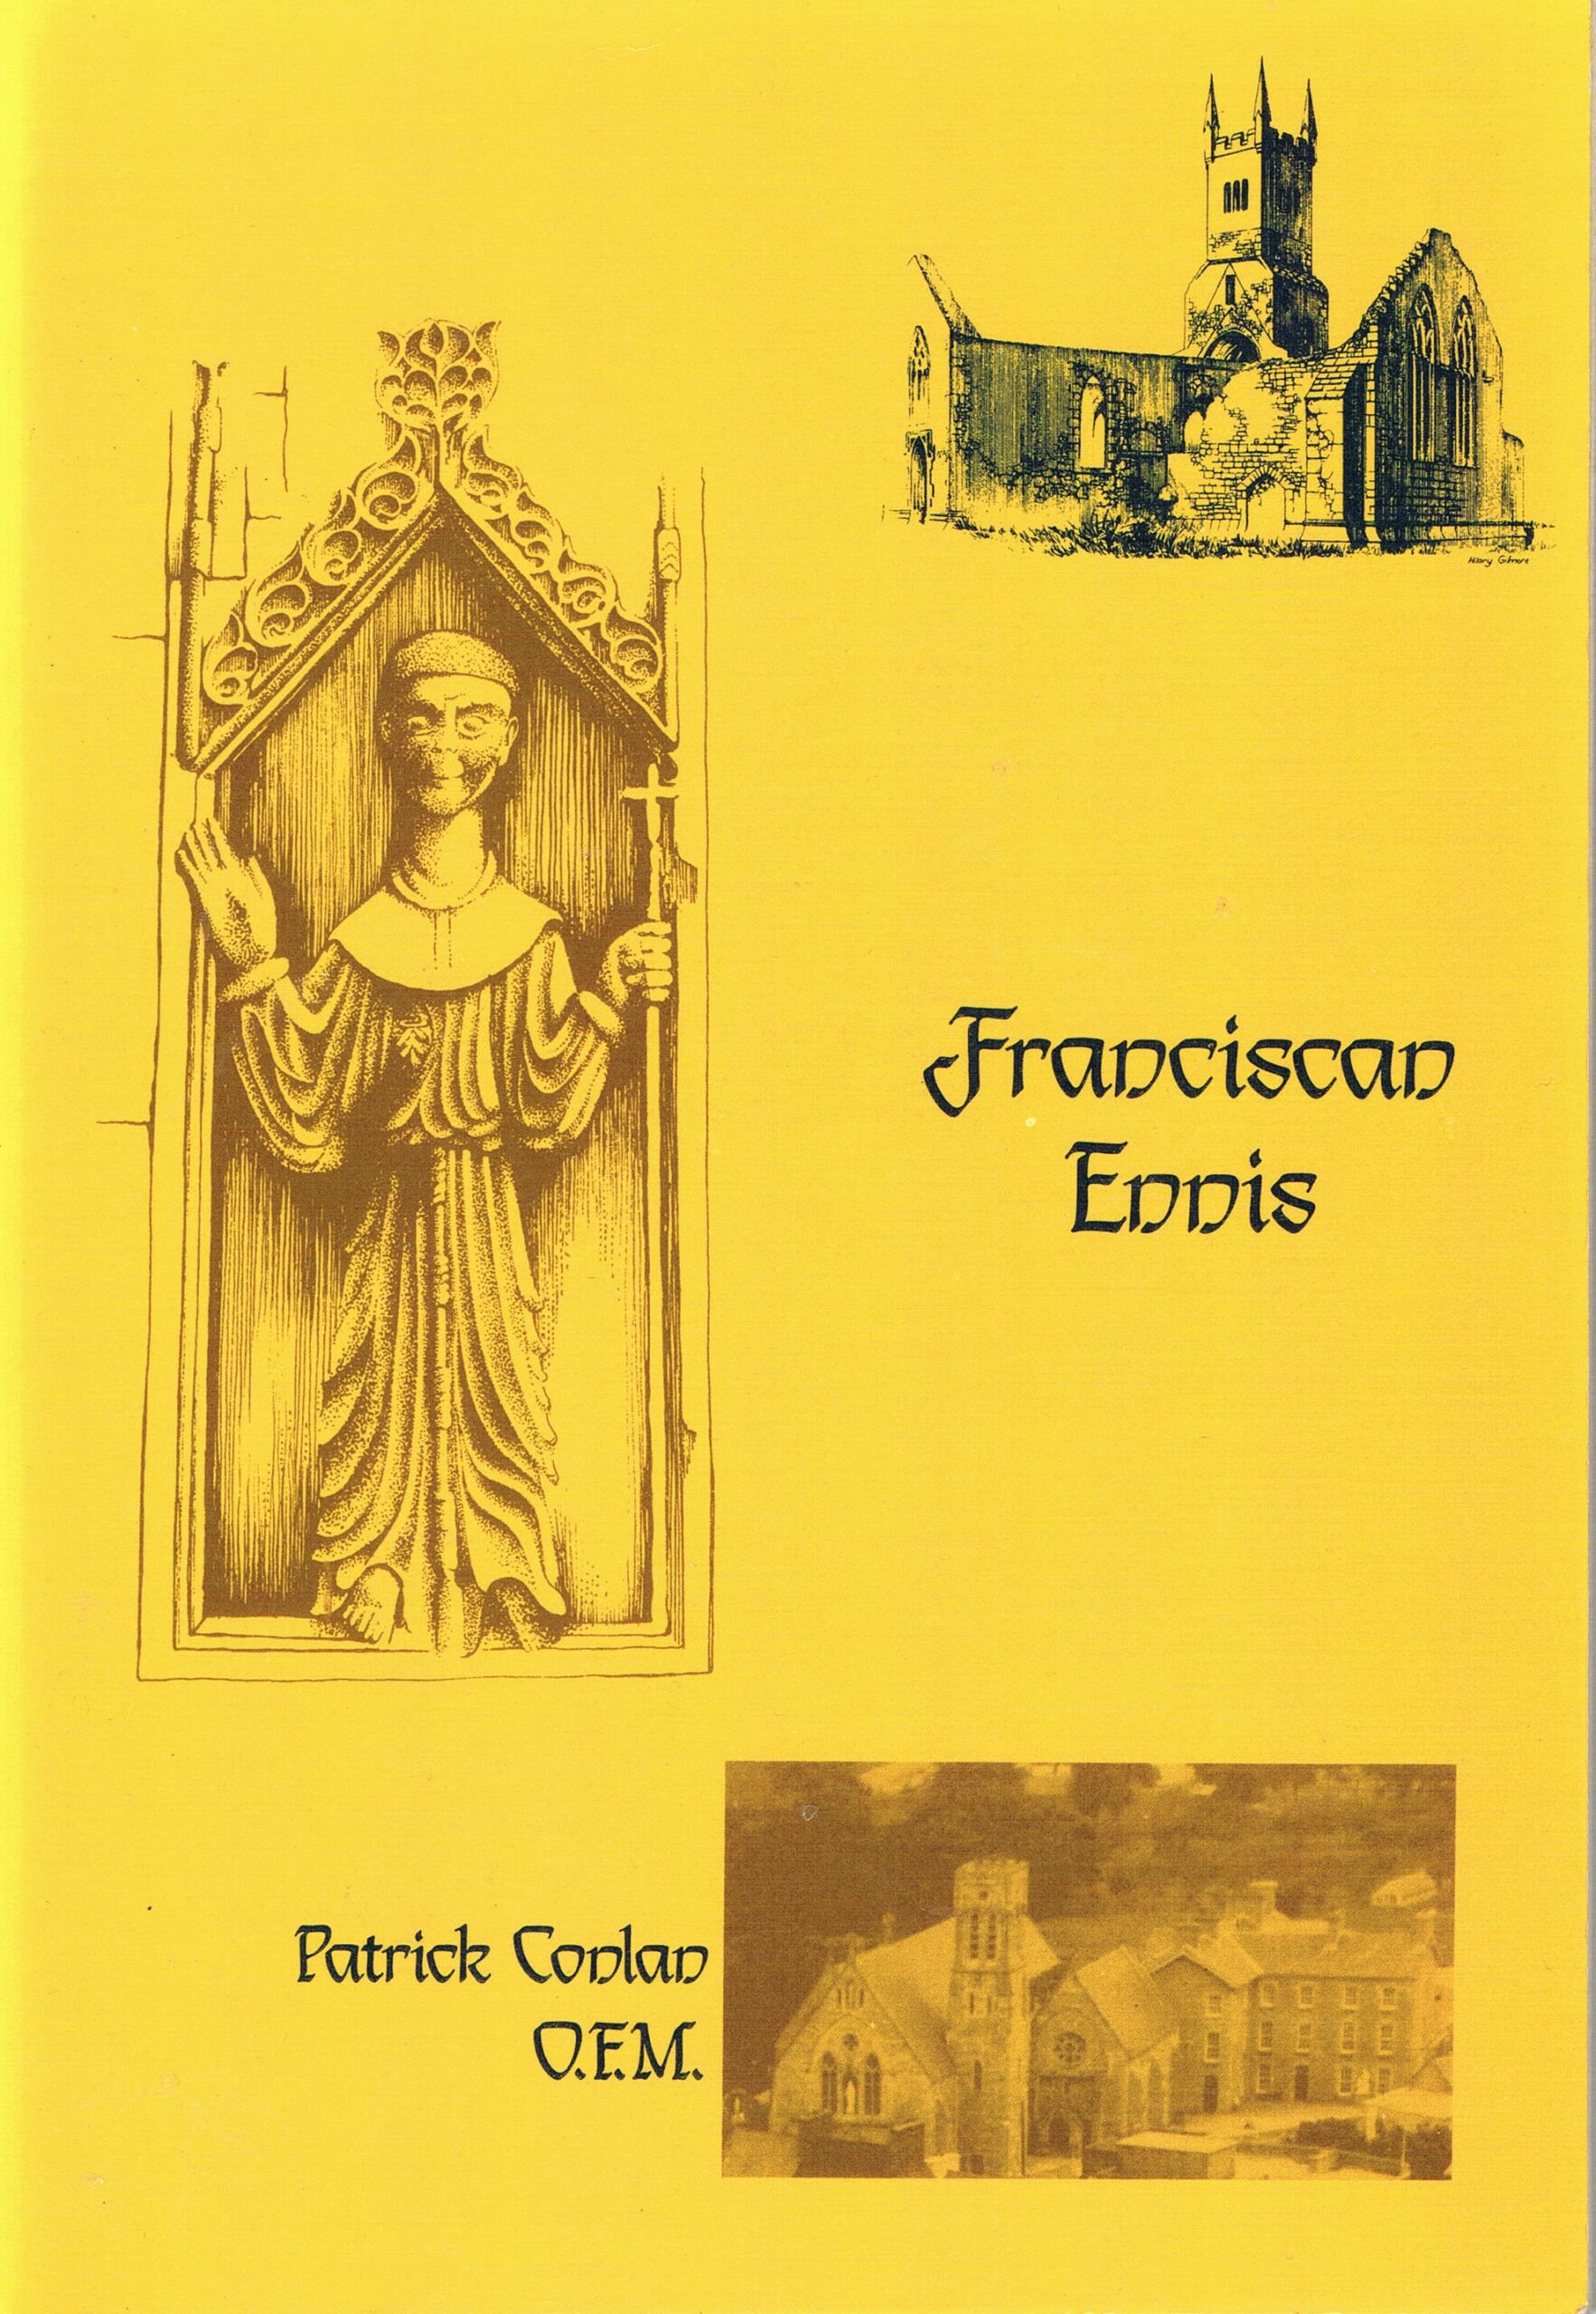 The Franciscans in Ennis by Patrick Conlan